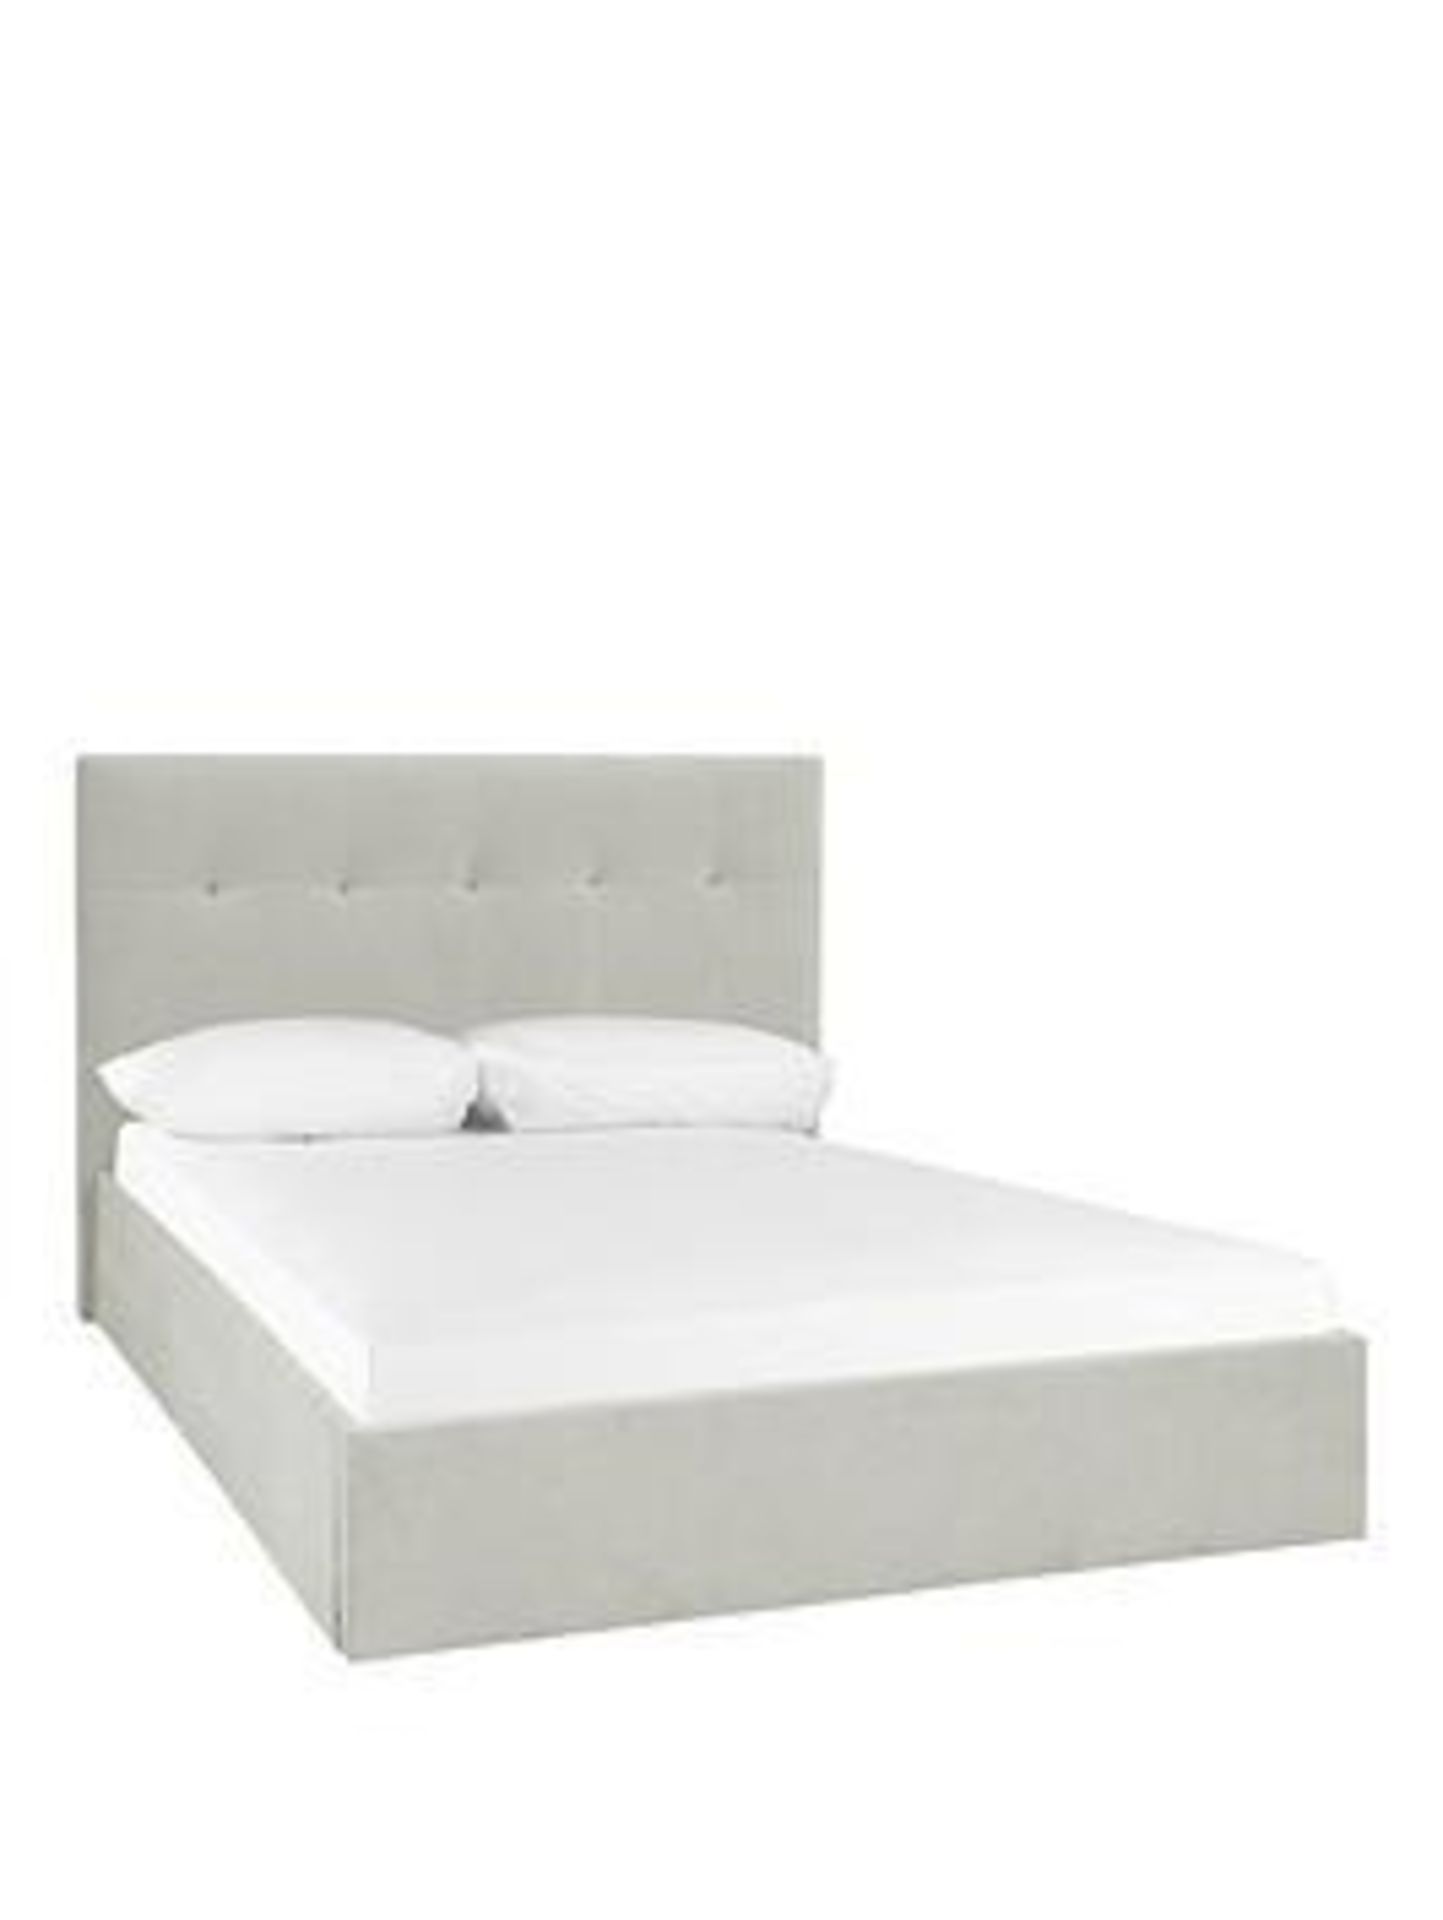 Boxed Item Rebecca Double Ottoman Usb Bed [Grey] 218X116X164Cm rrp, £826.0